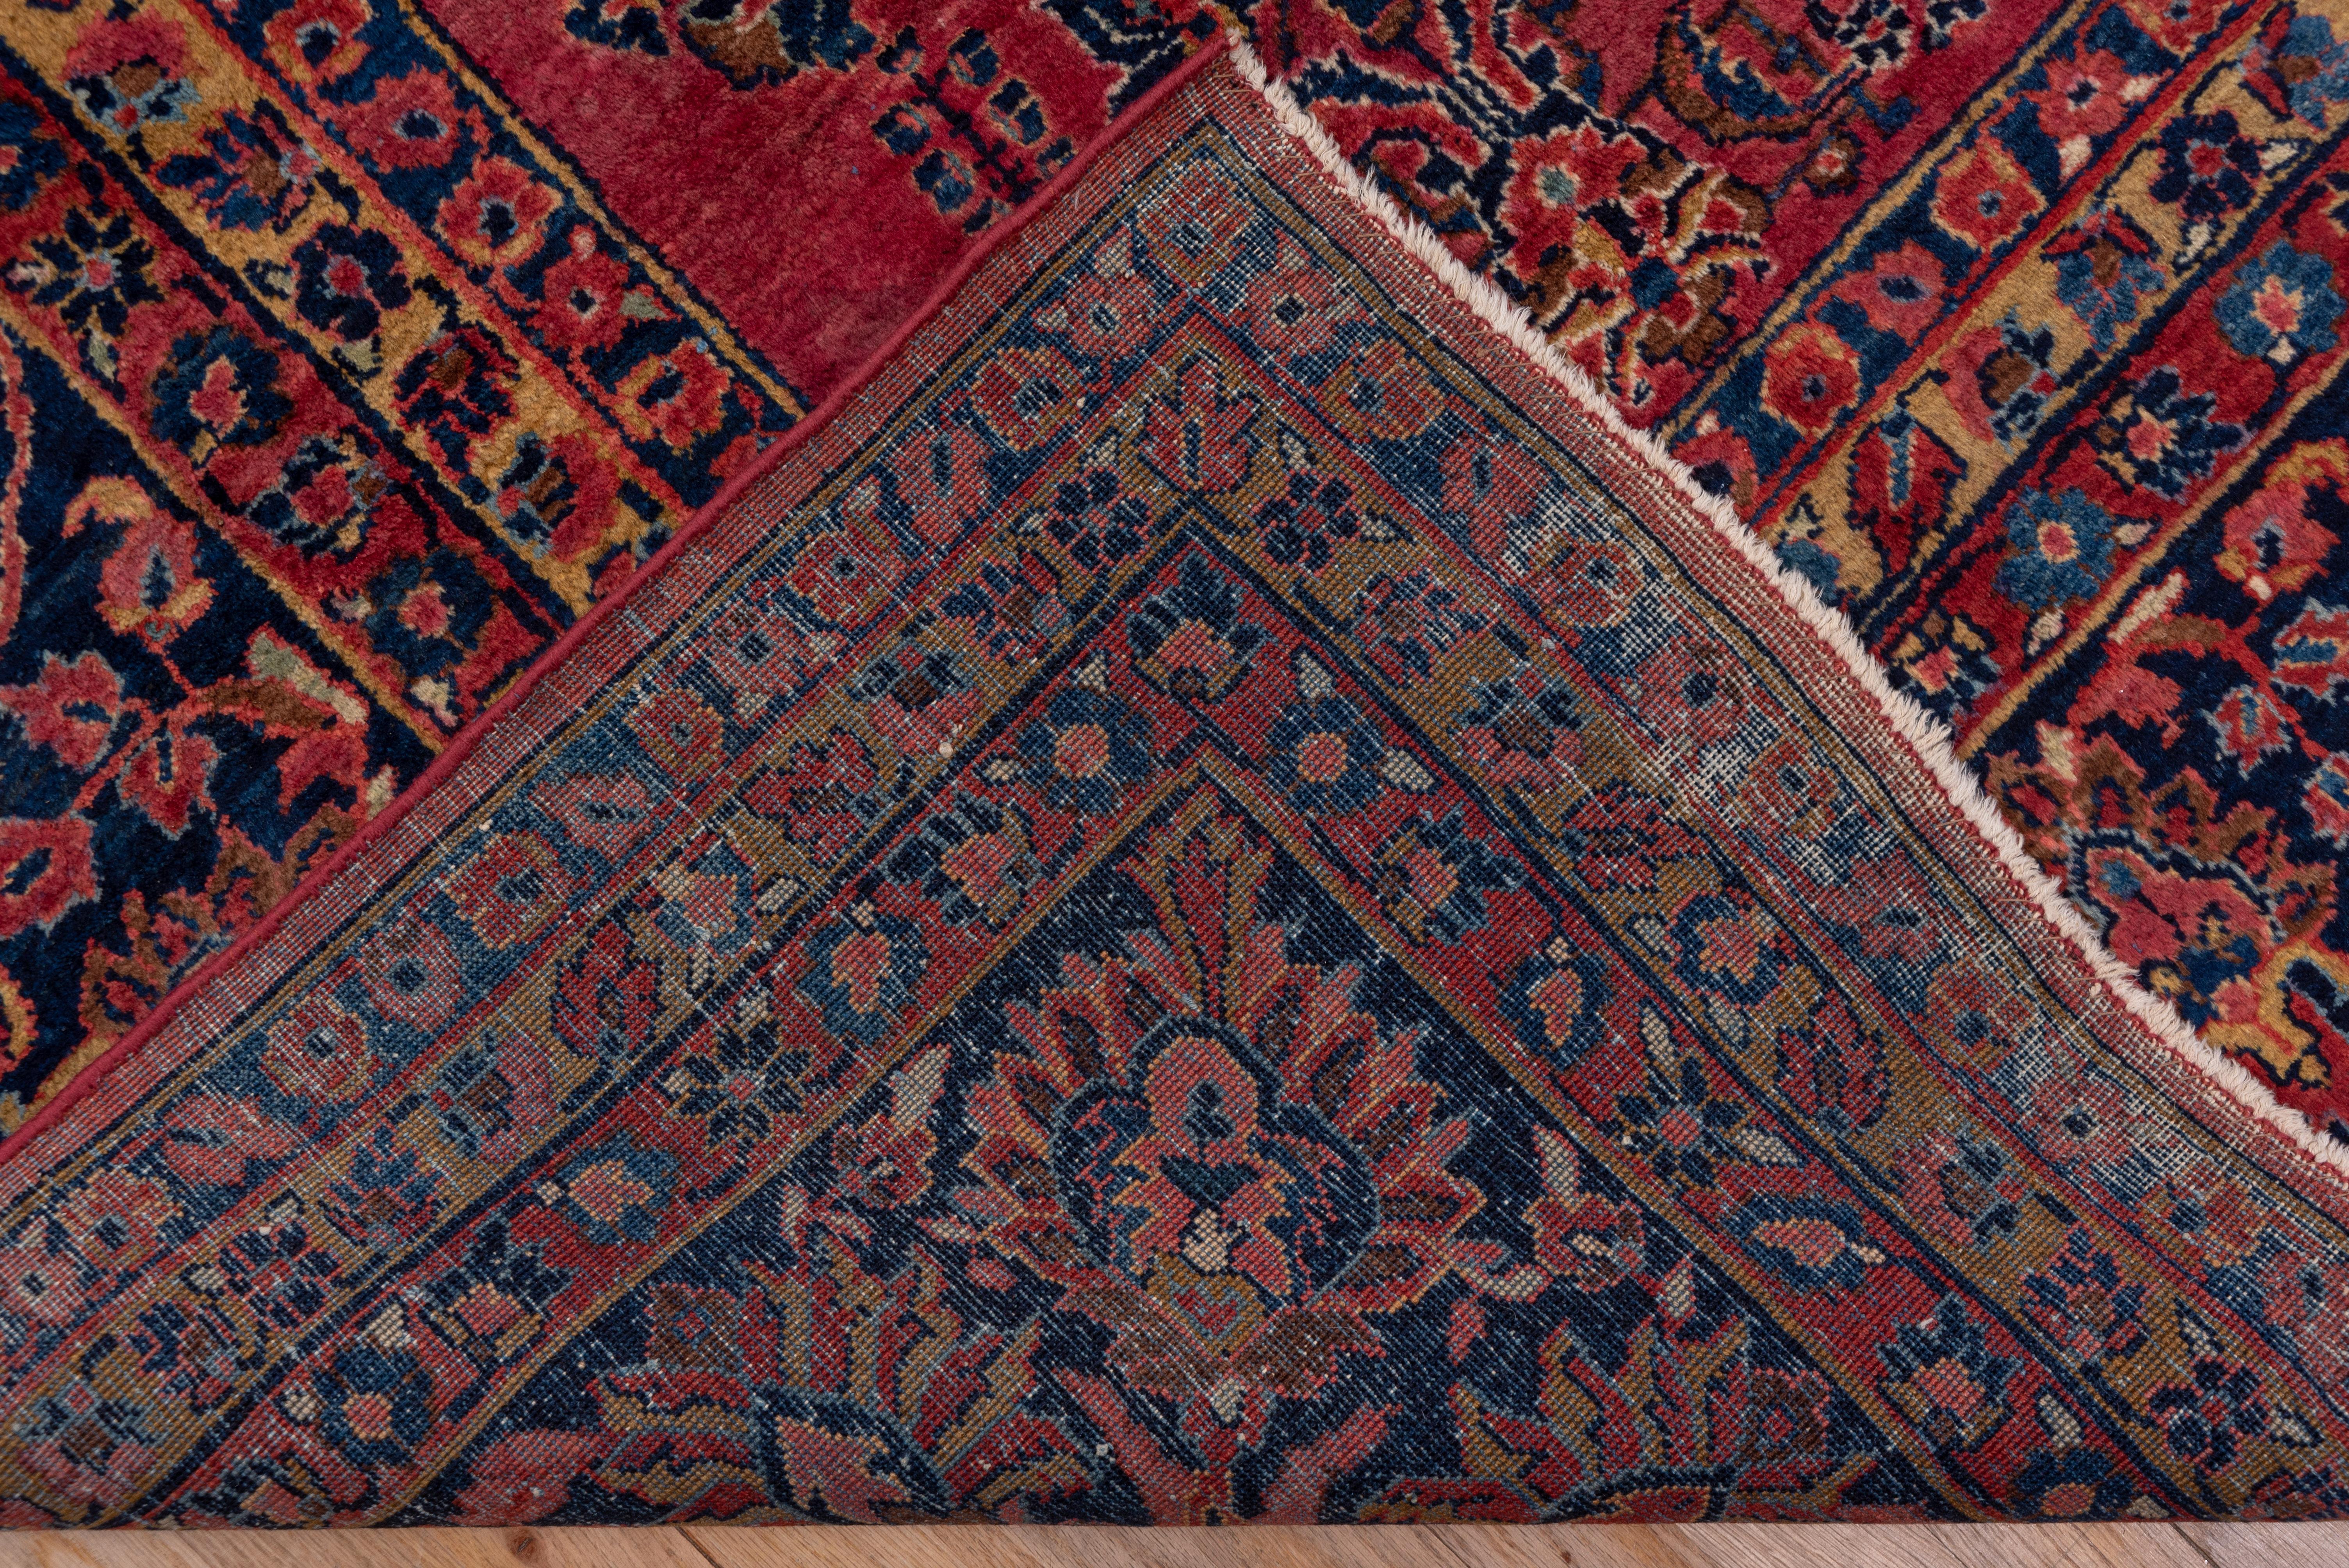 Antique Persian Sarouk Rug, Bright Red Field, Gold and Blue Accents, Medium Pile For Sale 2